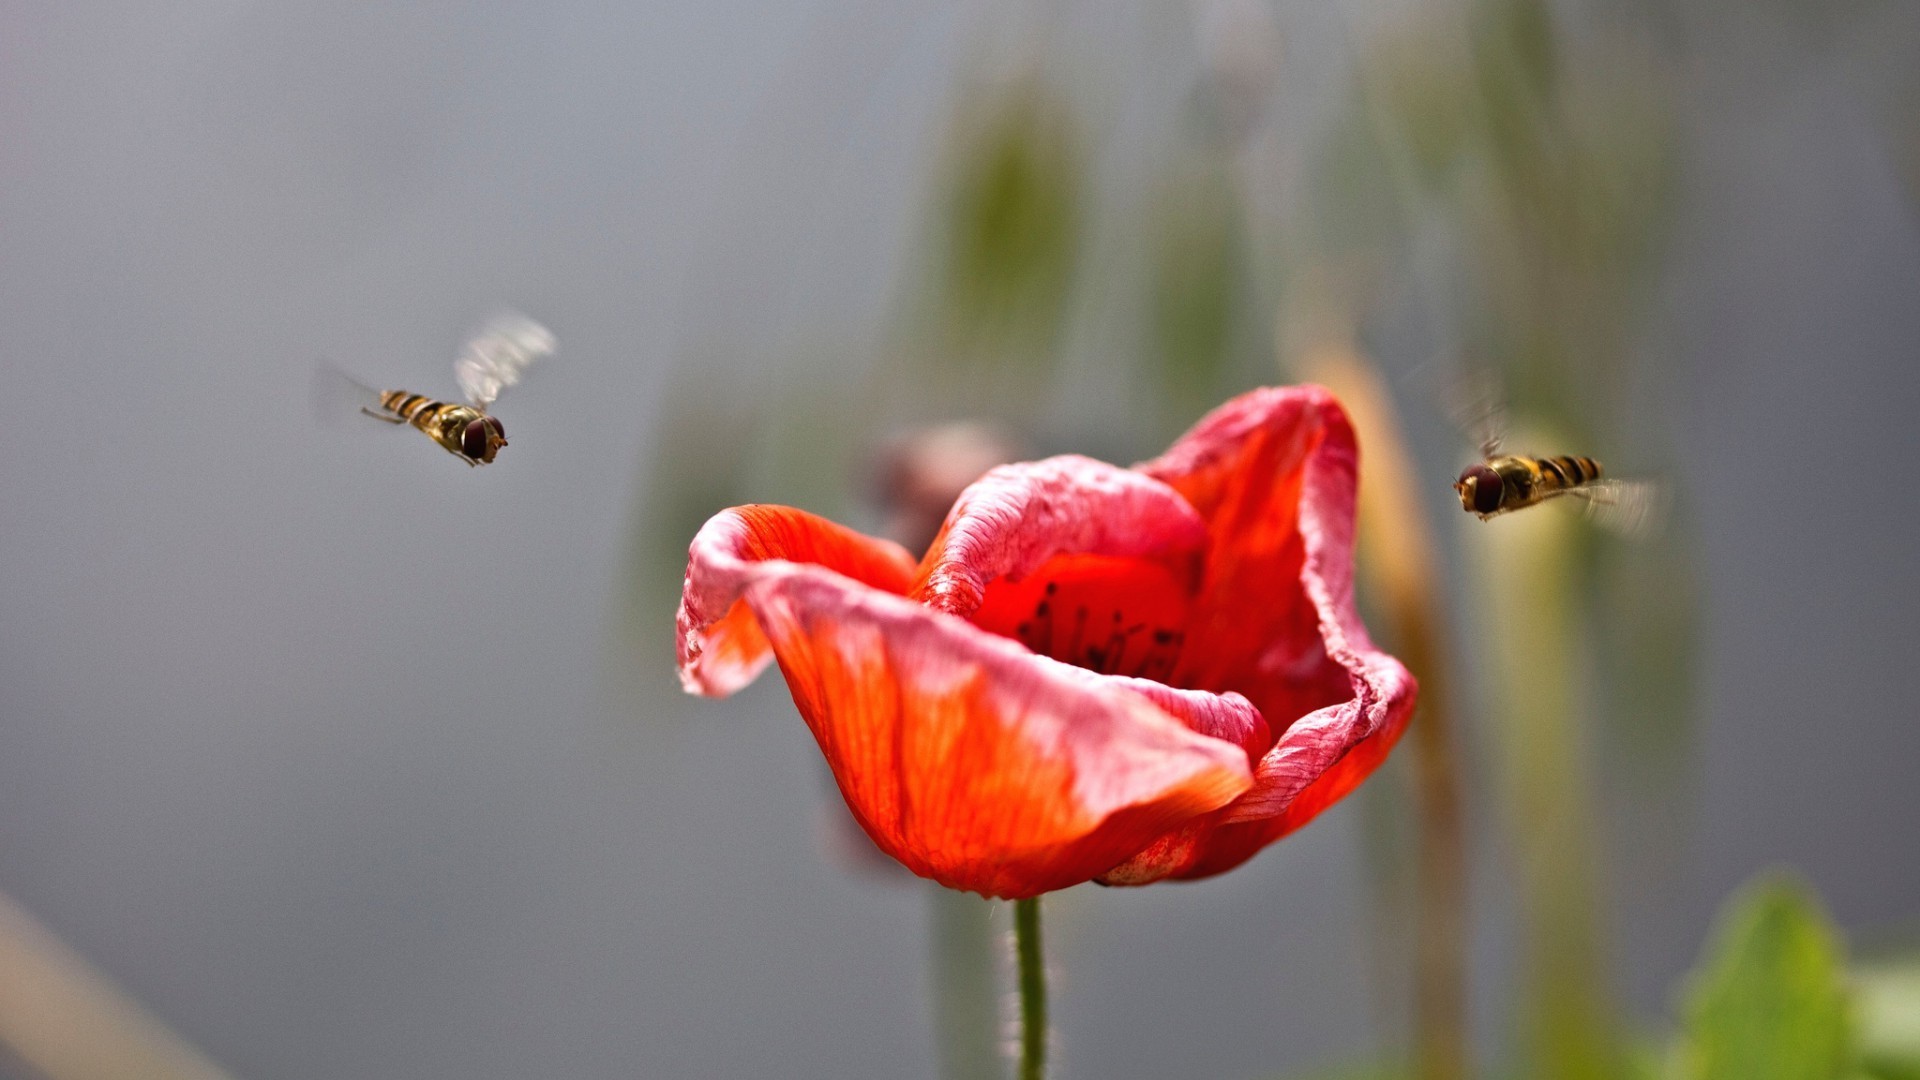 flowers, Red Flowers, Poppies, Bees, Insect Wallpaper